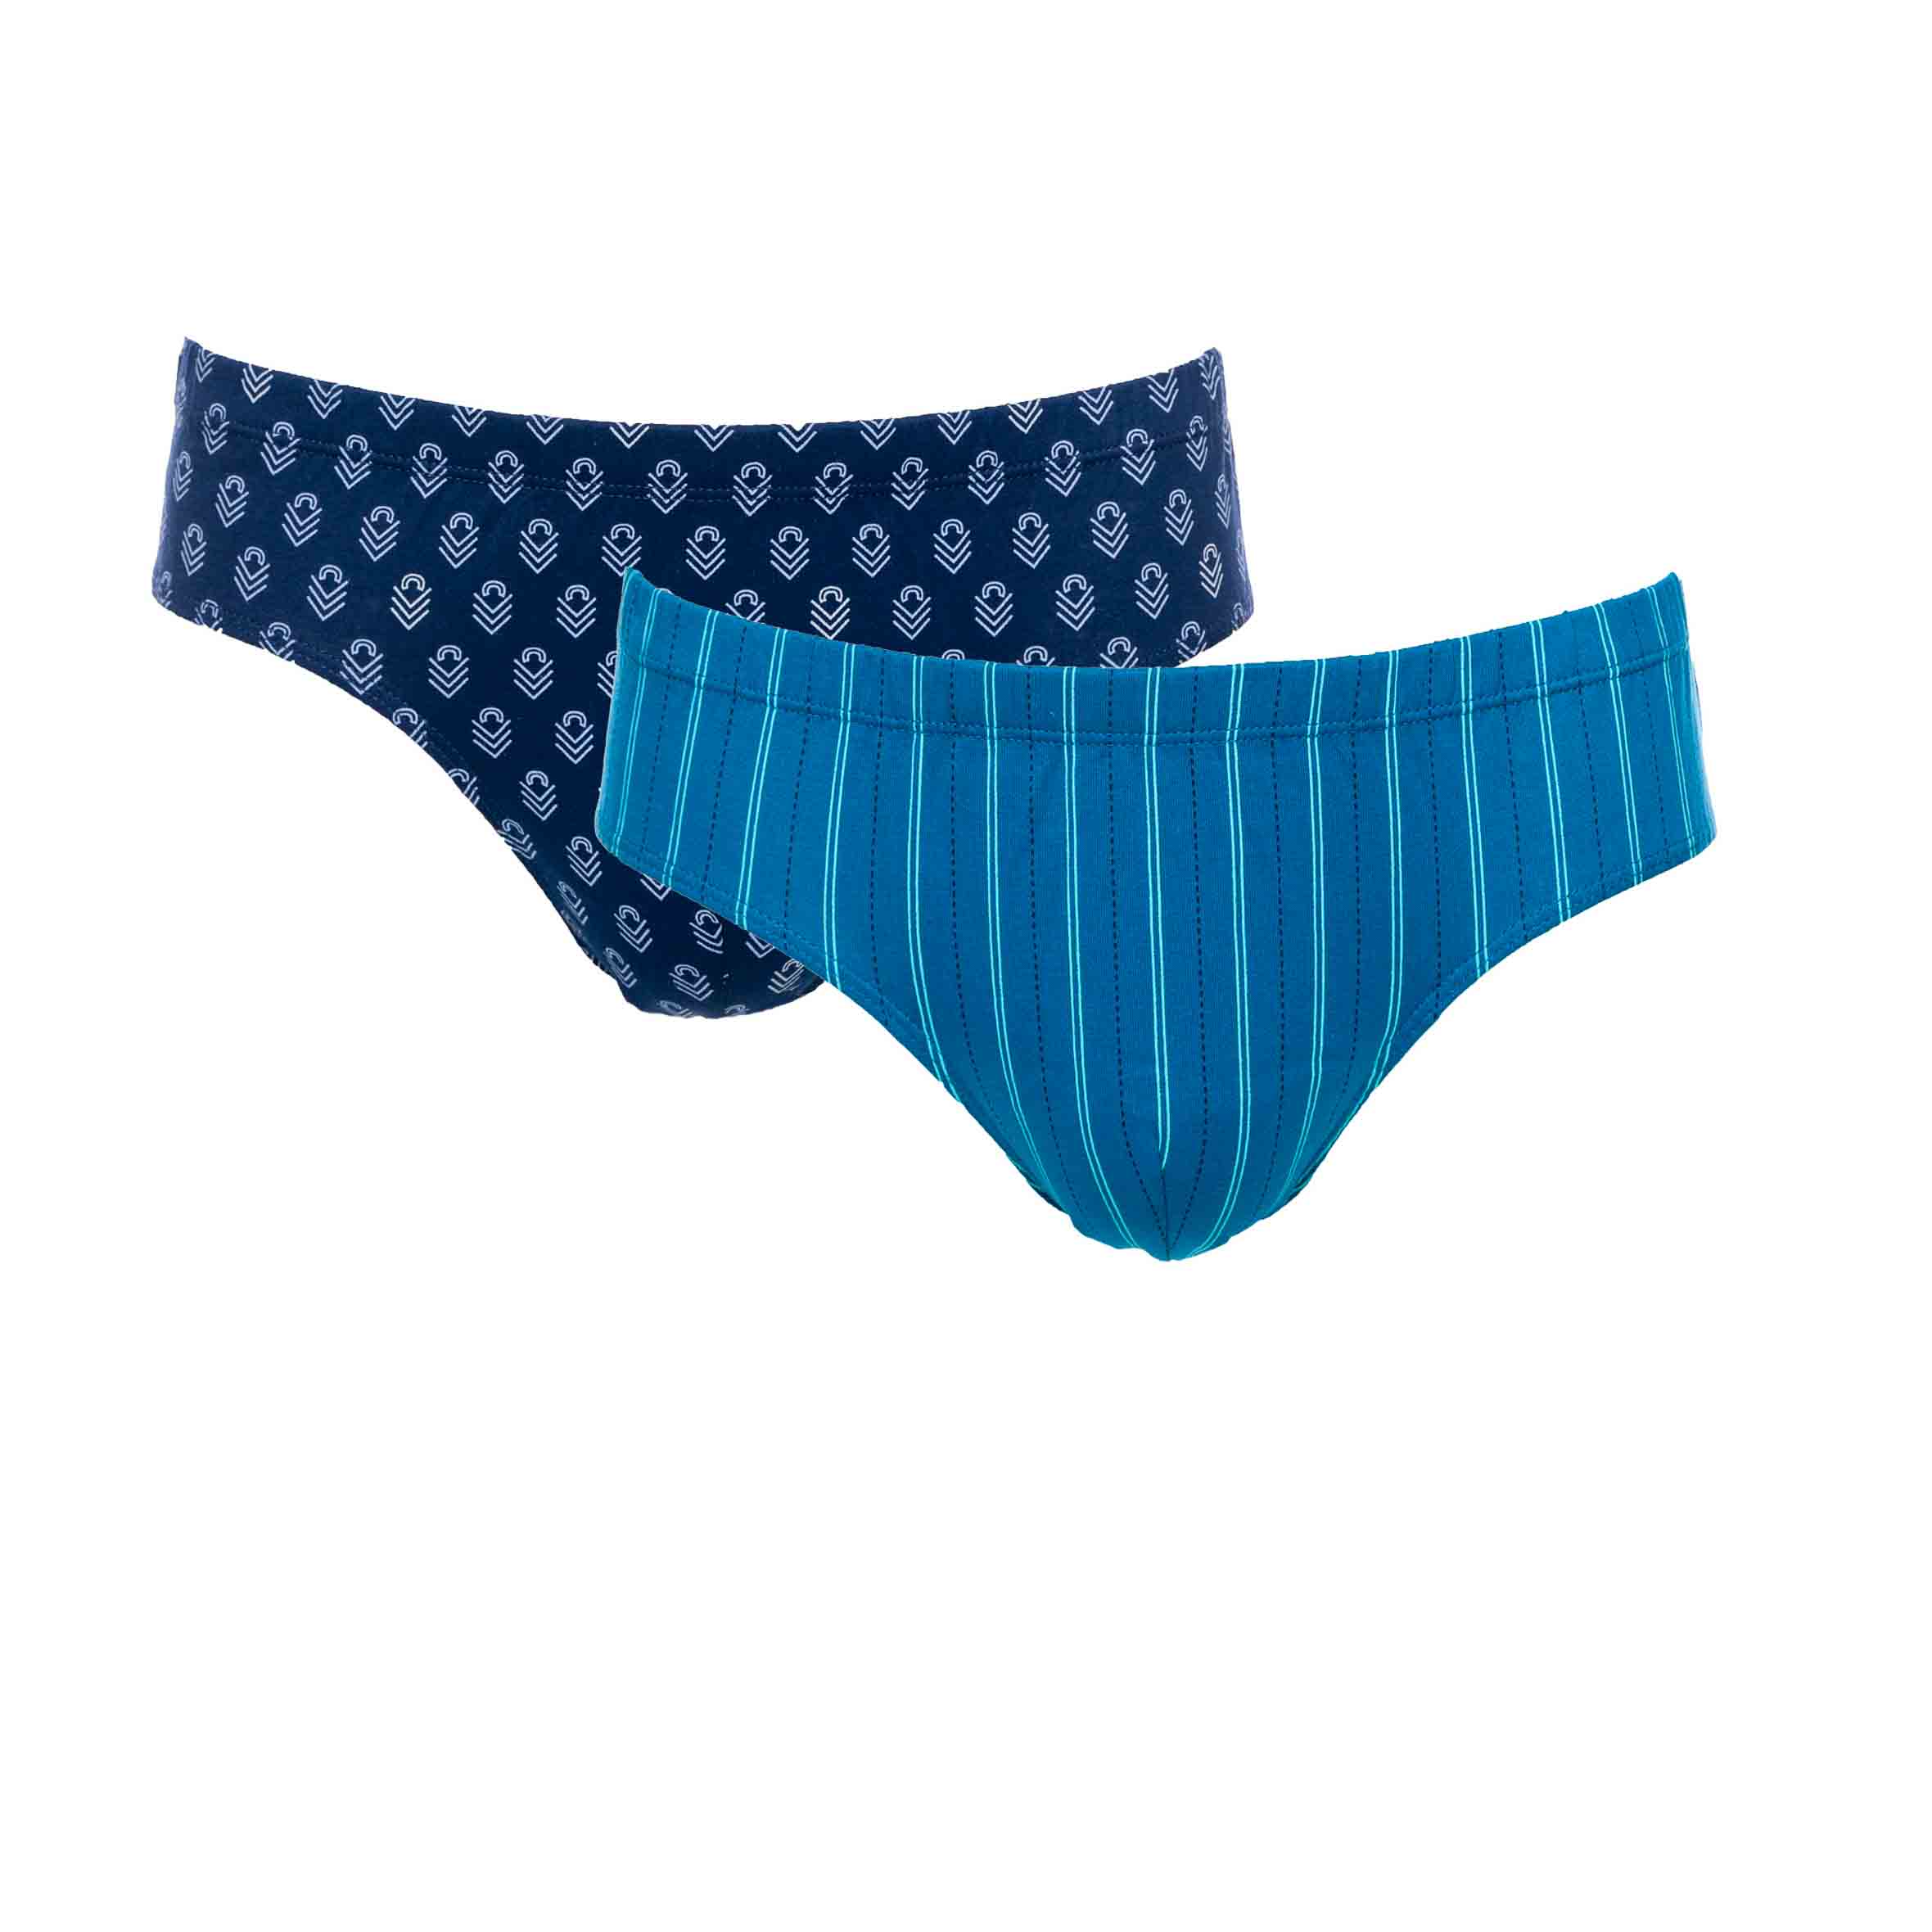 Pack of 2 Low-Rise Briefs in Mercerized Cotton Jersey Printed BLUE STRIPE and NAVY LOGO